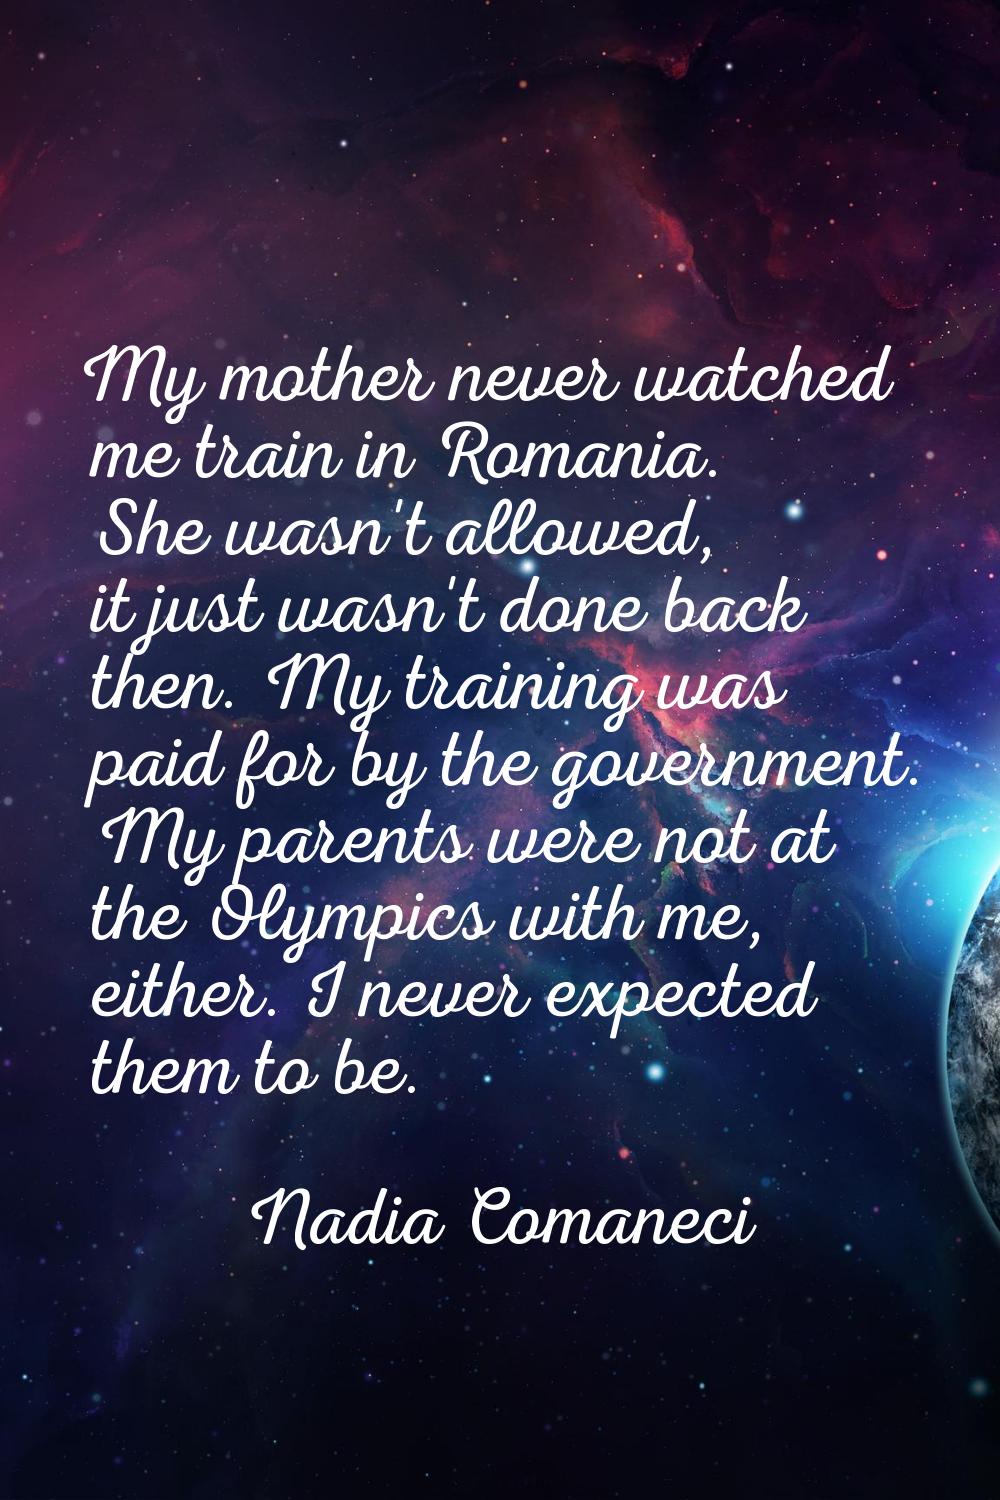 My mother never watched me train in Romania. She wasn't allowed, it just wasn't done back then. My 